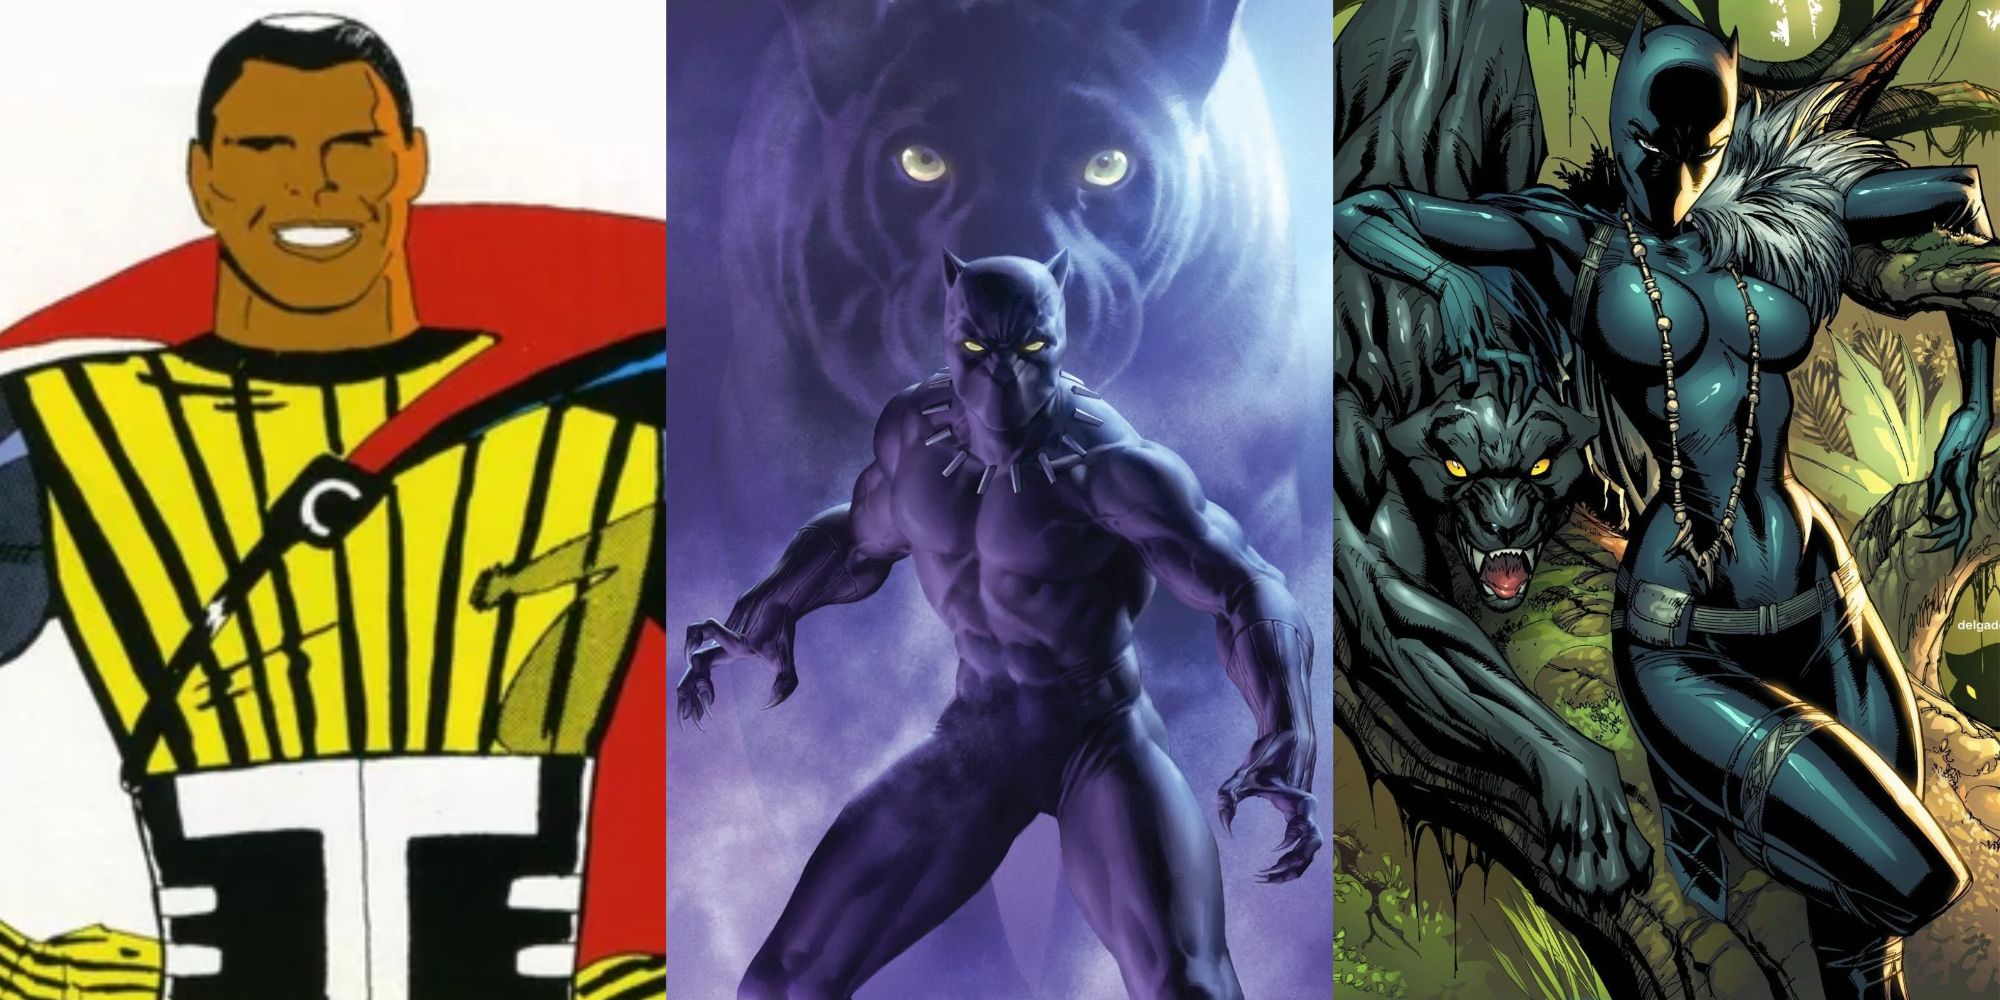 Split image of Coal Tiger, Black Panther, and Shuri as Black Panther from Marvel Comics.